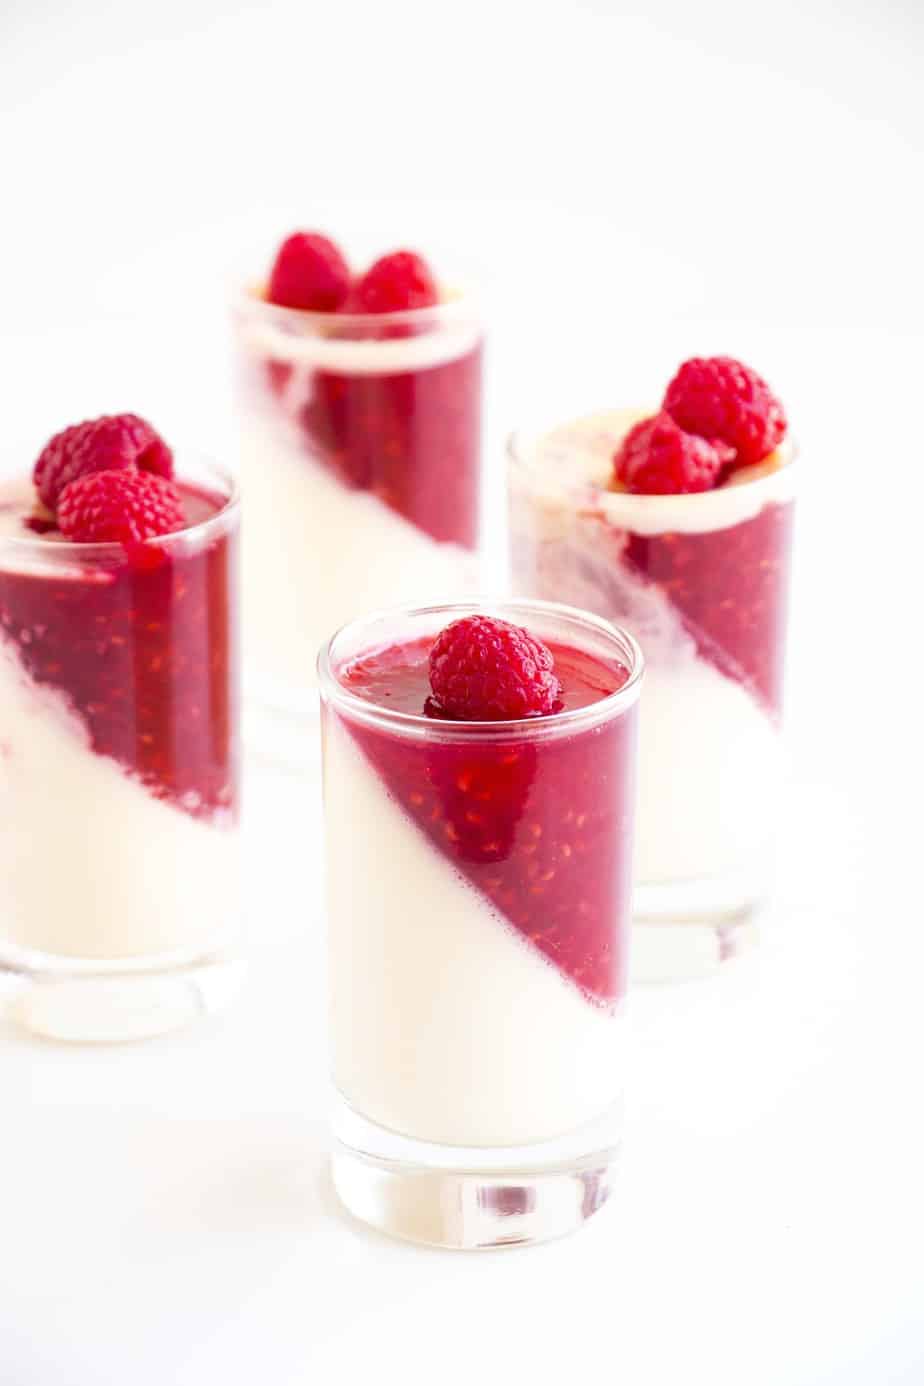 Four vanilla Raspberry Panna cottas in serving glasses topped with fresh raspberries.